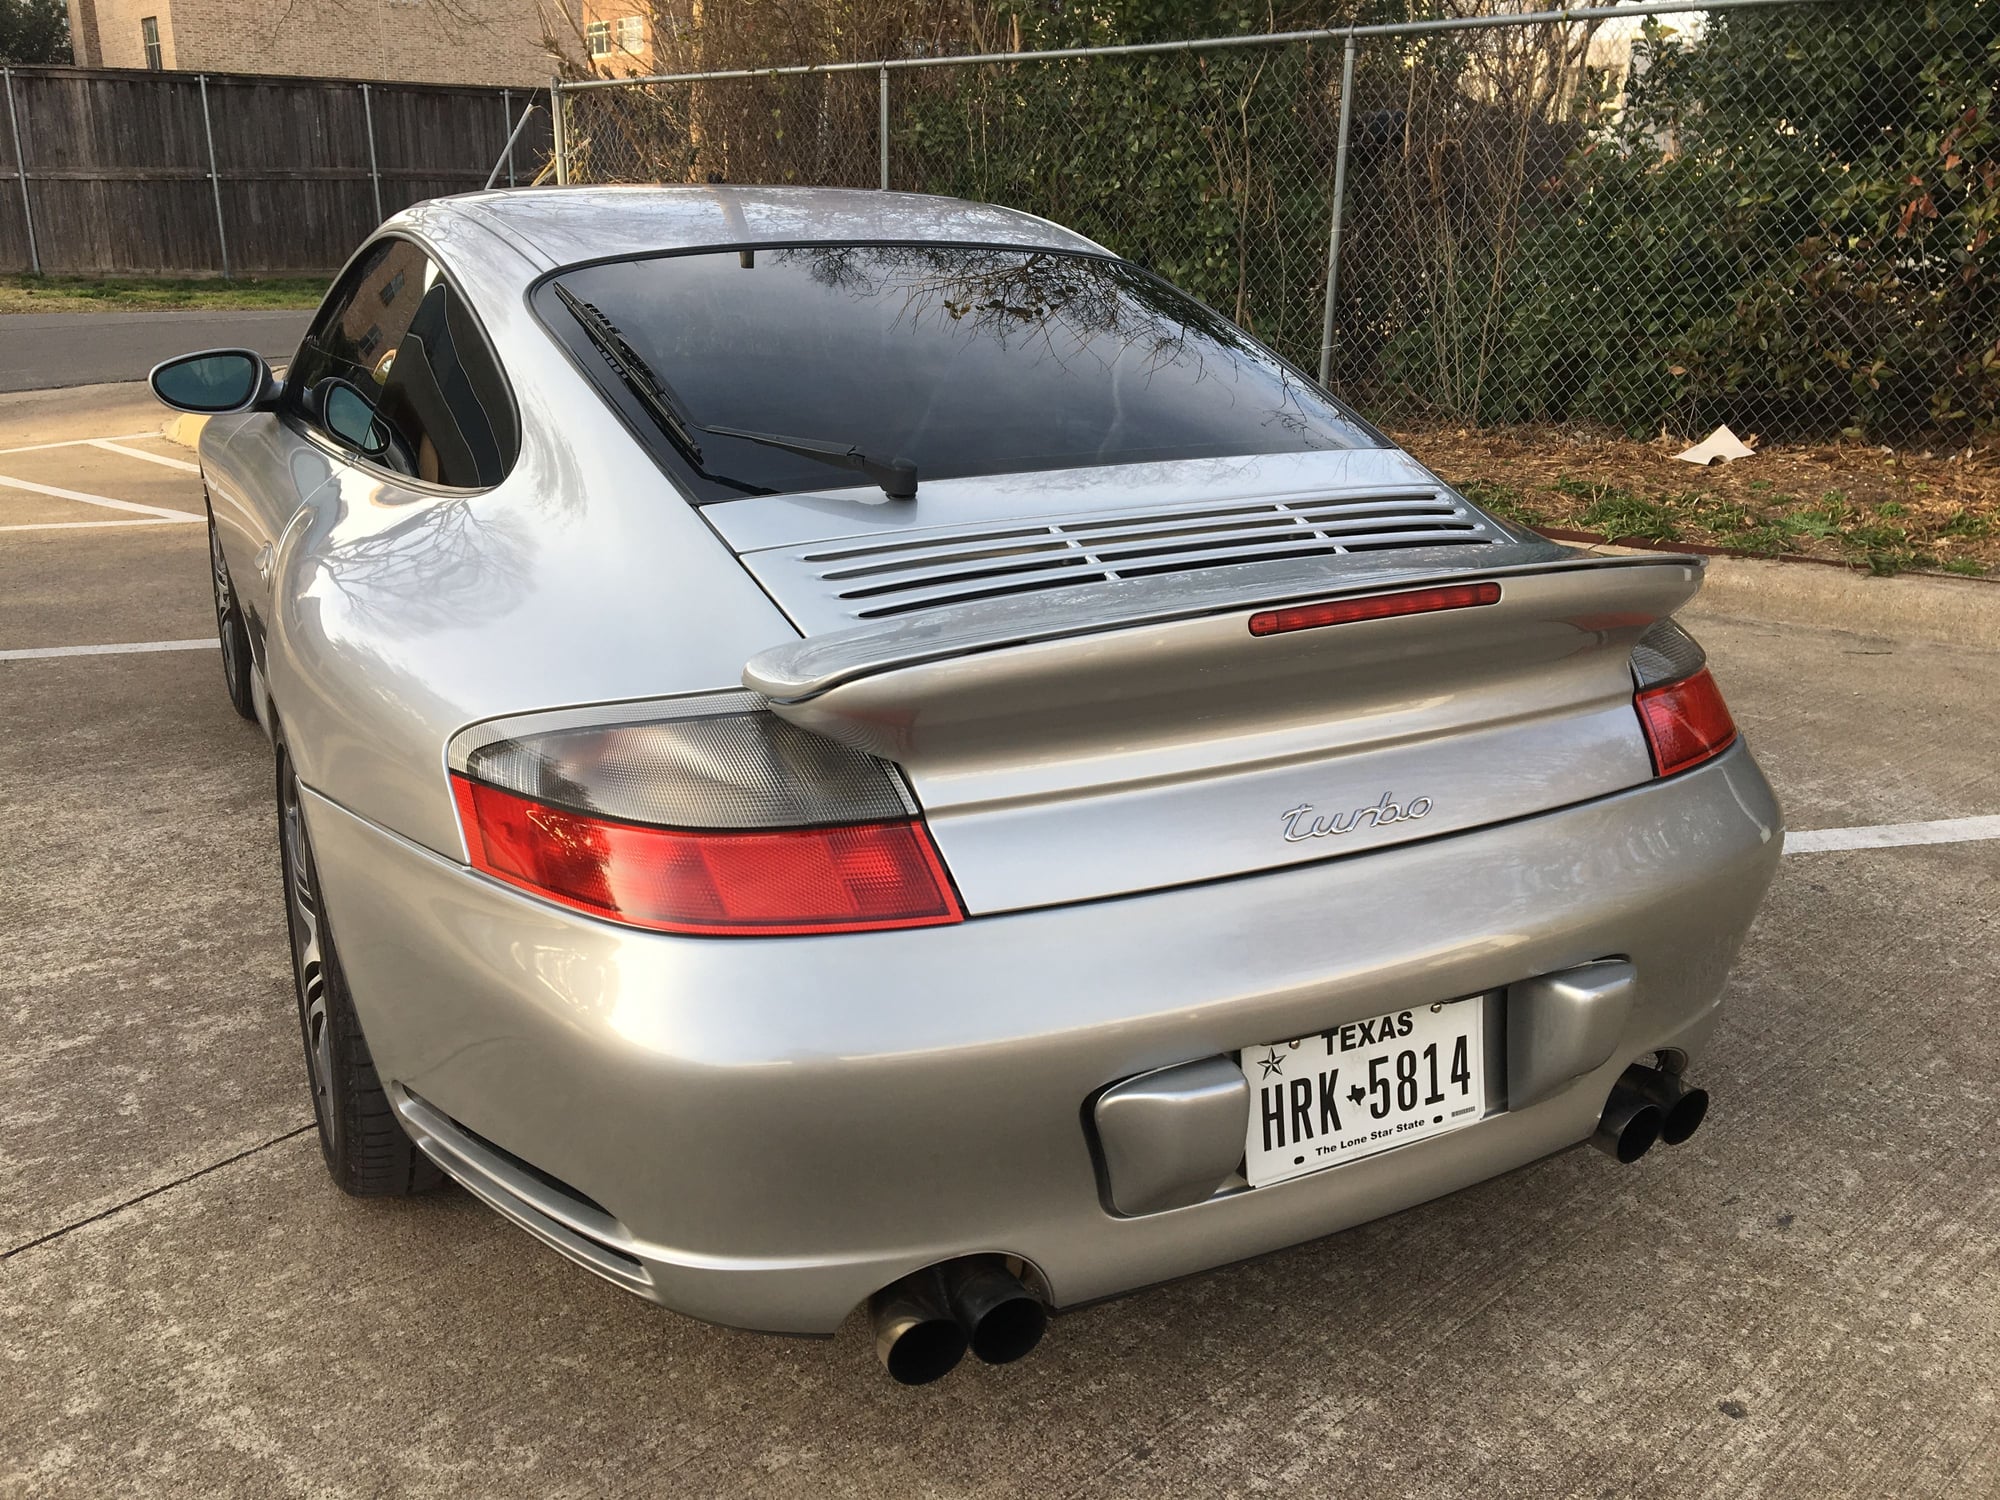 2001 Porsche 911 - 2001 Porsche 996 Turbo Six Speed - Used - VIN WP0AB29951S685078 - 91,312 Miles - 6 cyl - AWD - Manual - Coupe - Silver - Dallas, TX 75206, United States